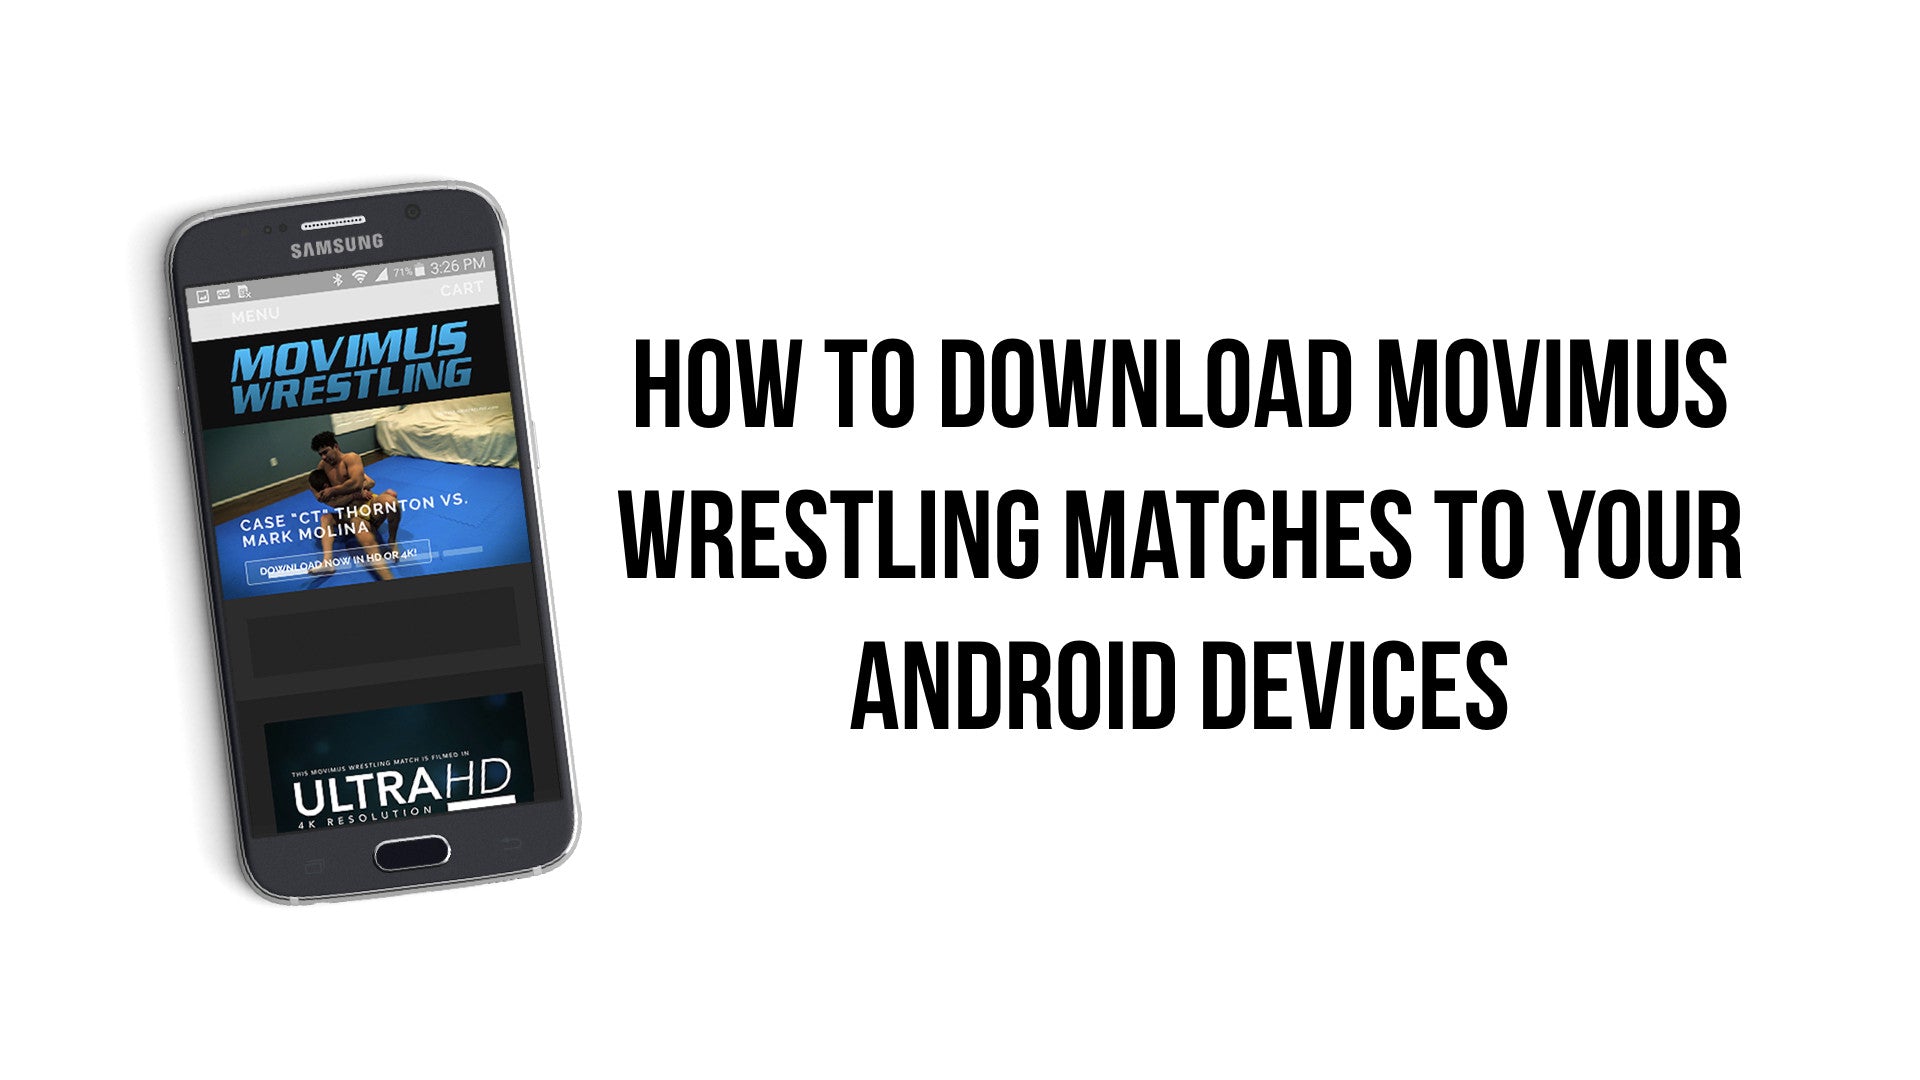 How to Download Movimus Wrestling matches to your Android devices